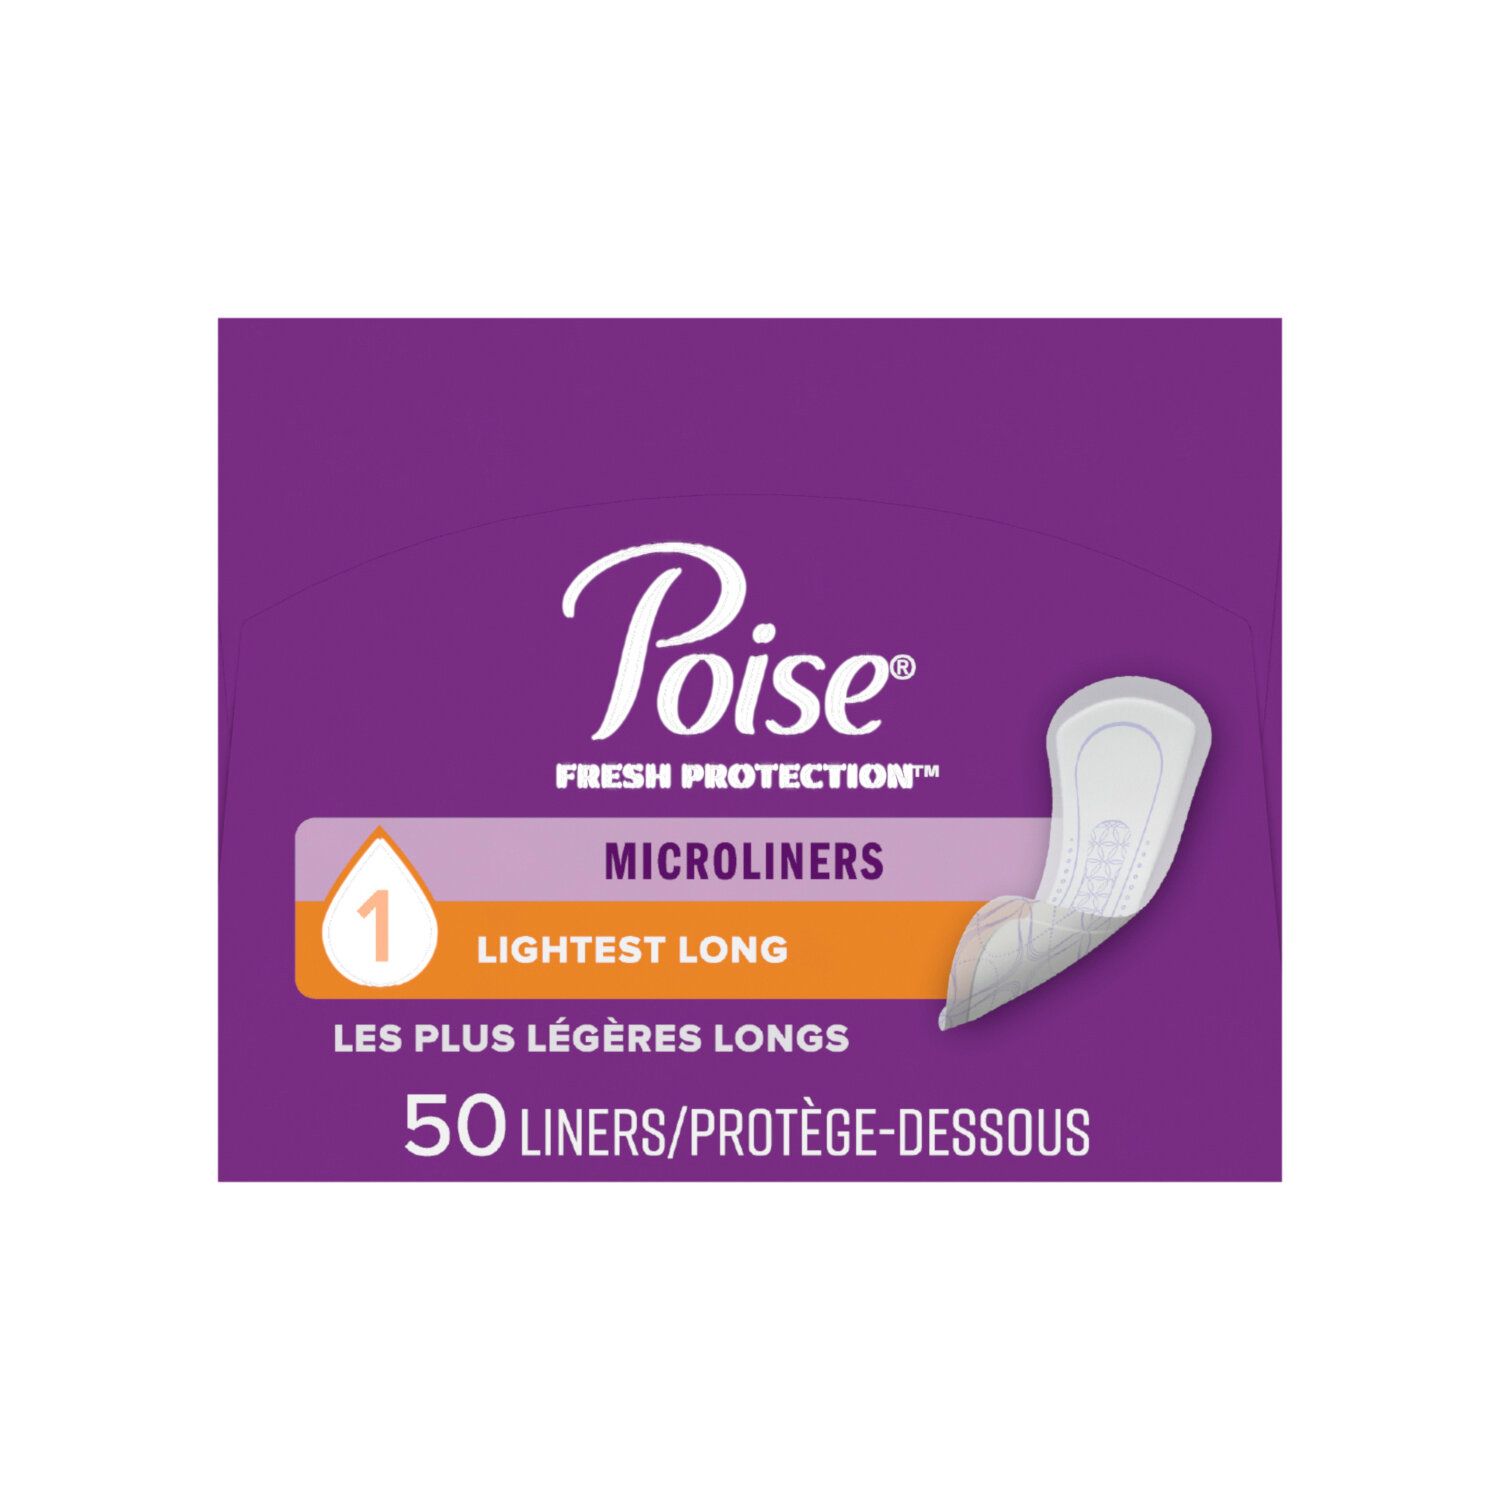 POISE MICROLINERS-50 LINERS-OVER 1 MONTH SUPPLY-LONG LENGTH-/ A6-153